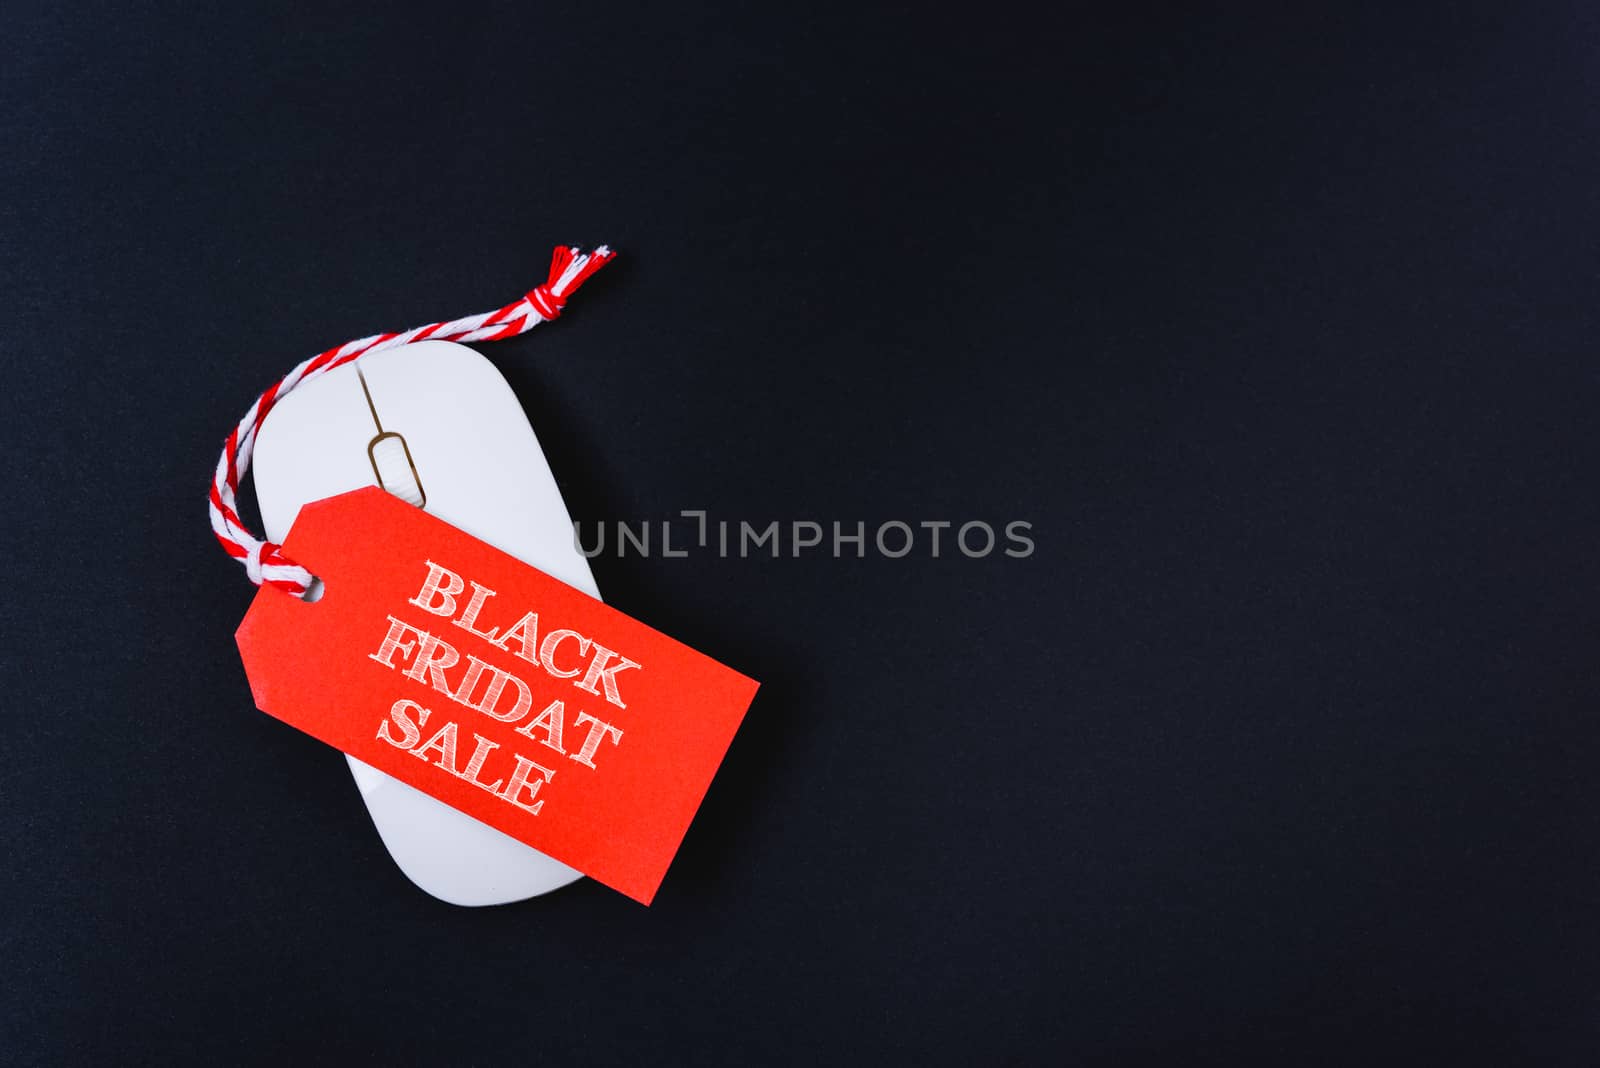 Online shopping Black Friday sale text red tag on white mouse by Sorapop